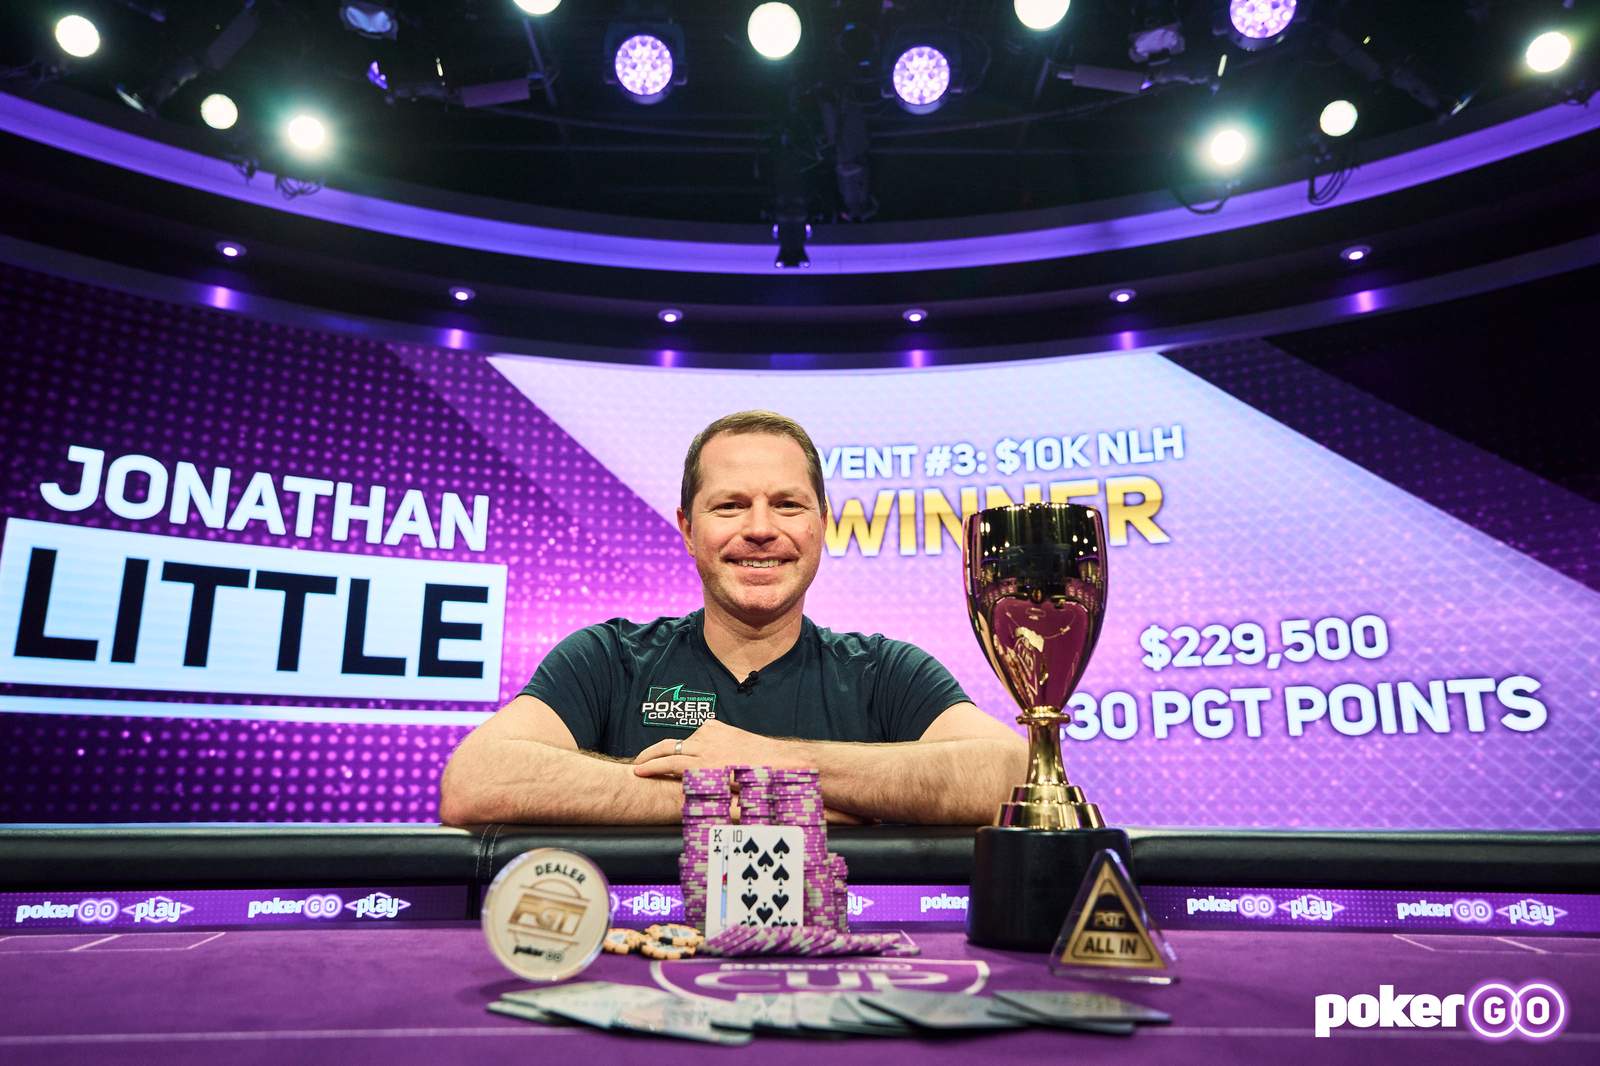 Jonathan Little Wins Event #3: $10,100 No-Limit Hold'em for $229,500